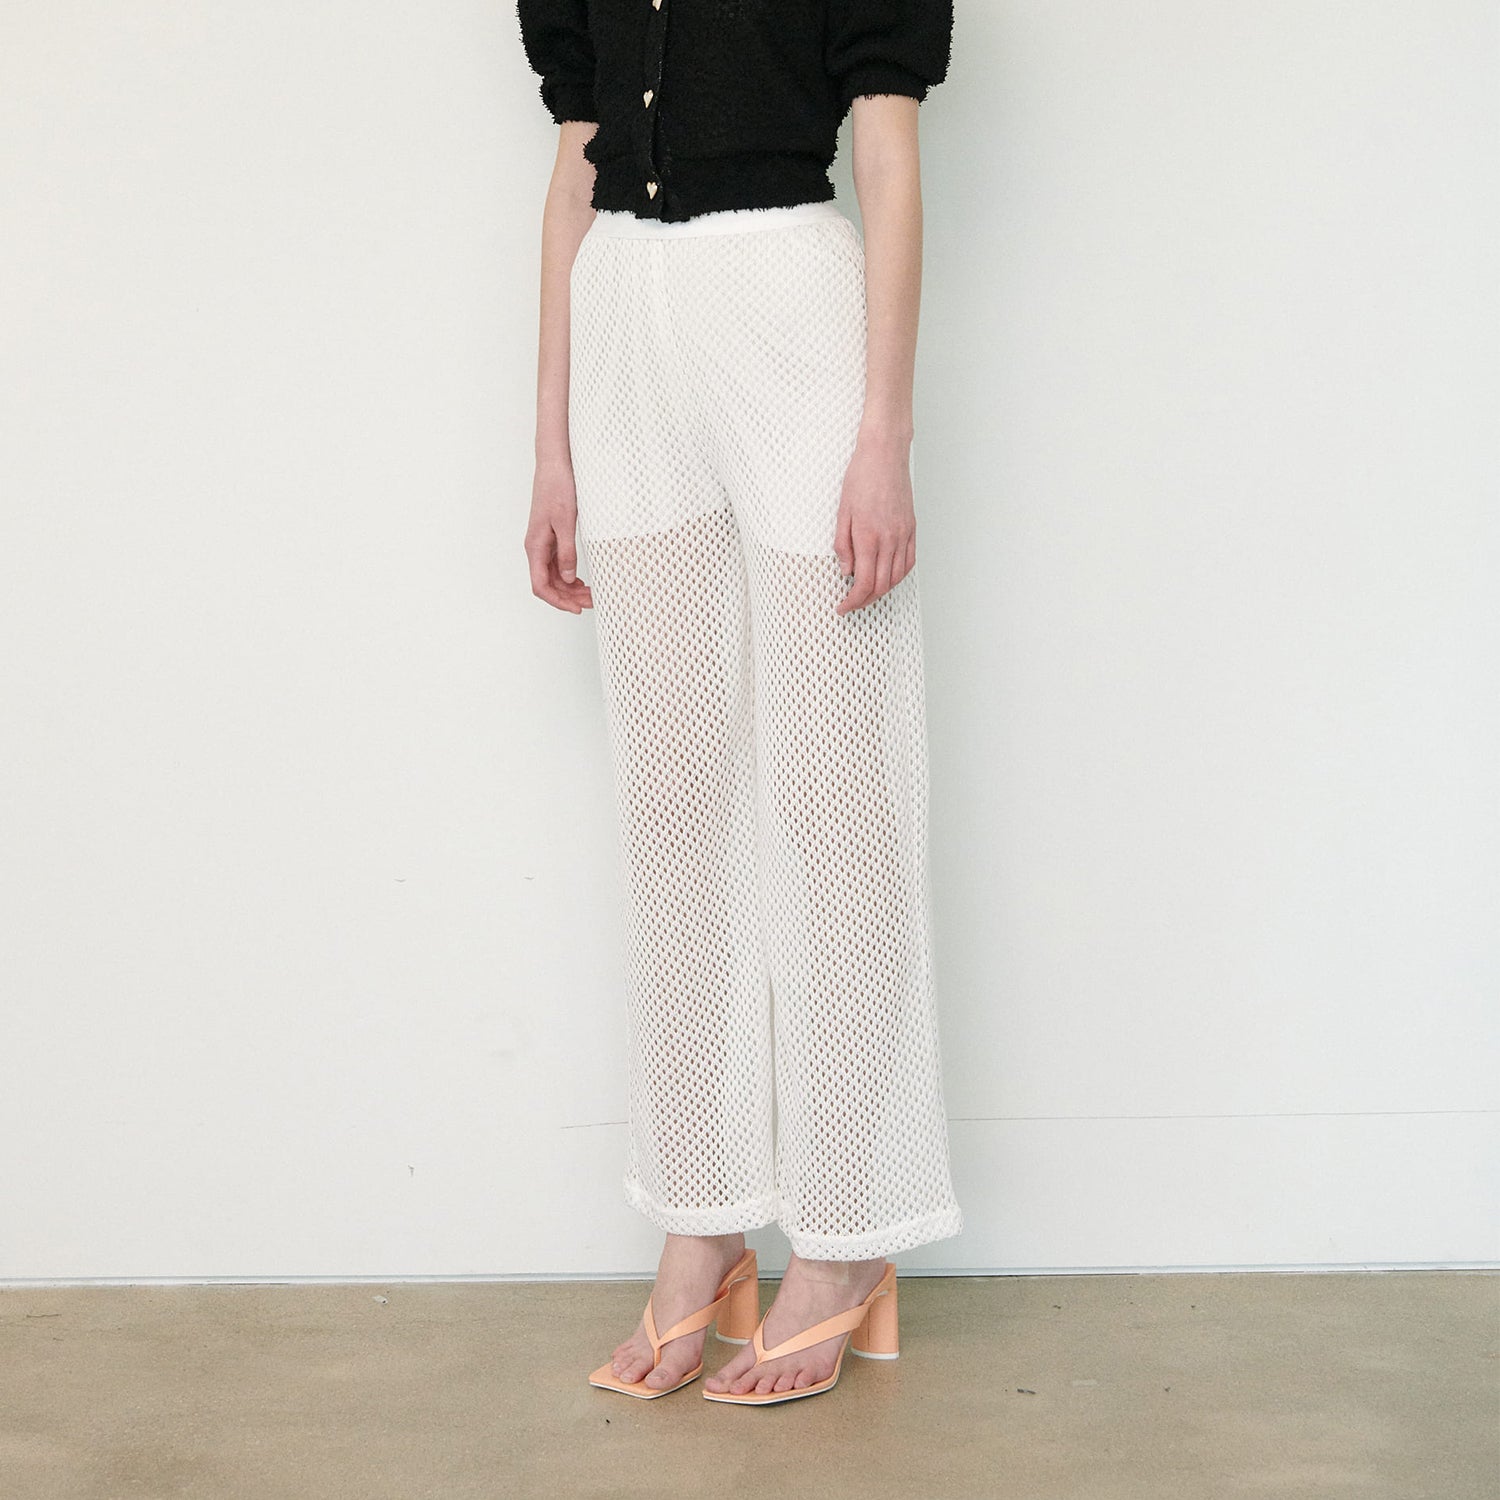 SEE-THROUTH NET PANTS, WHITE